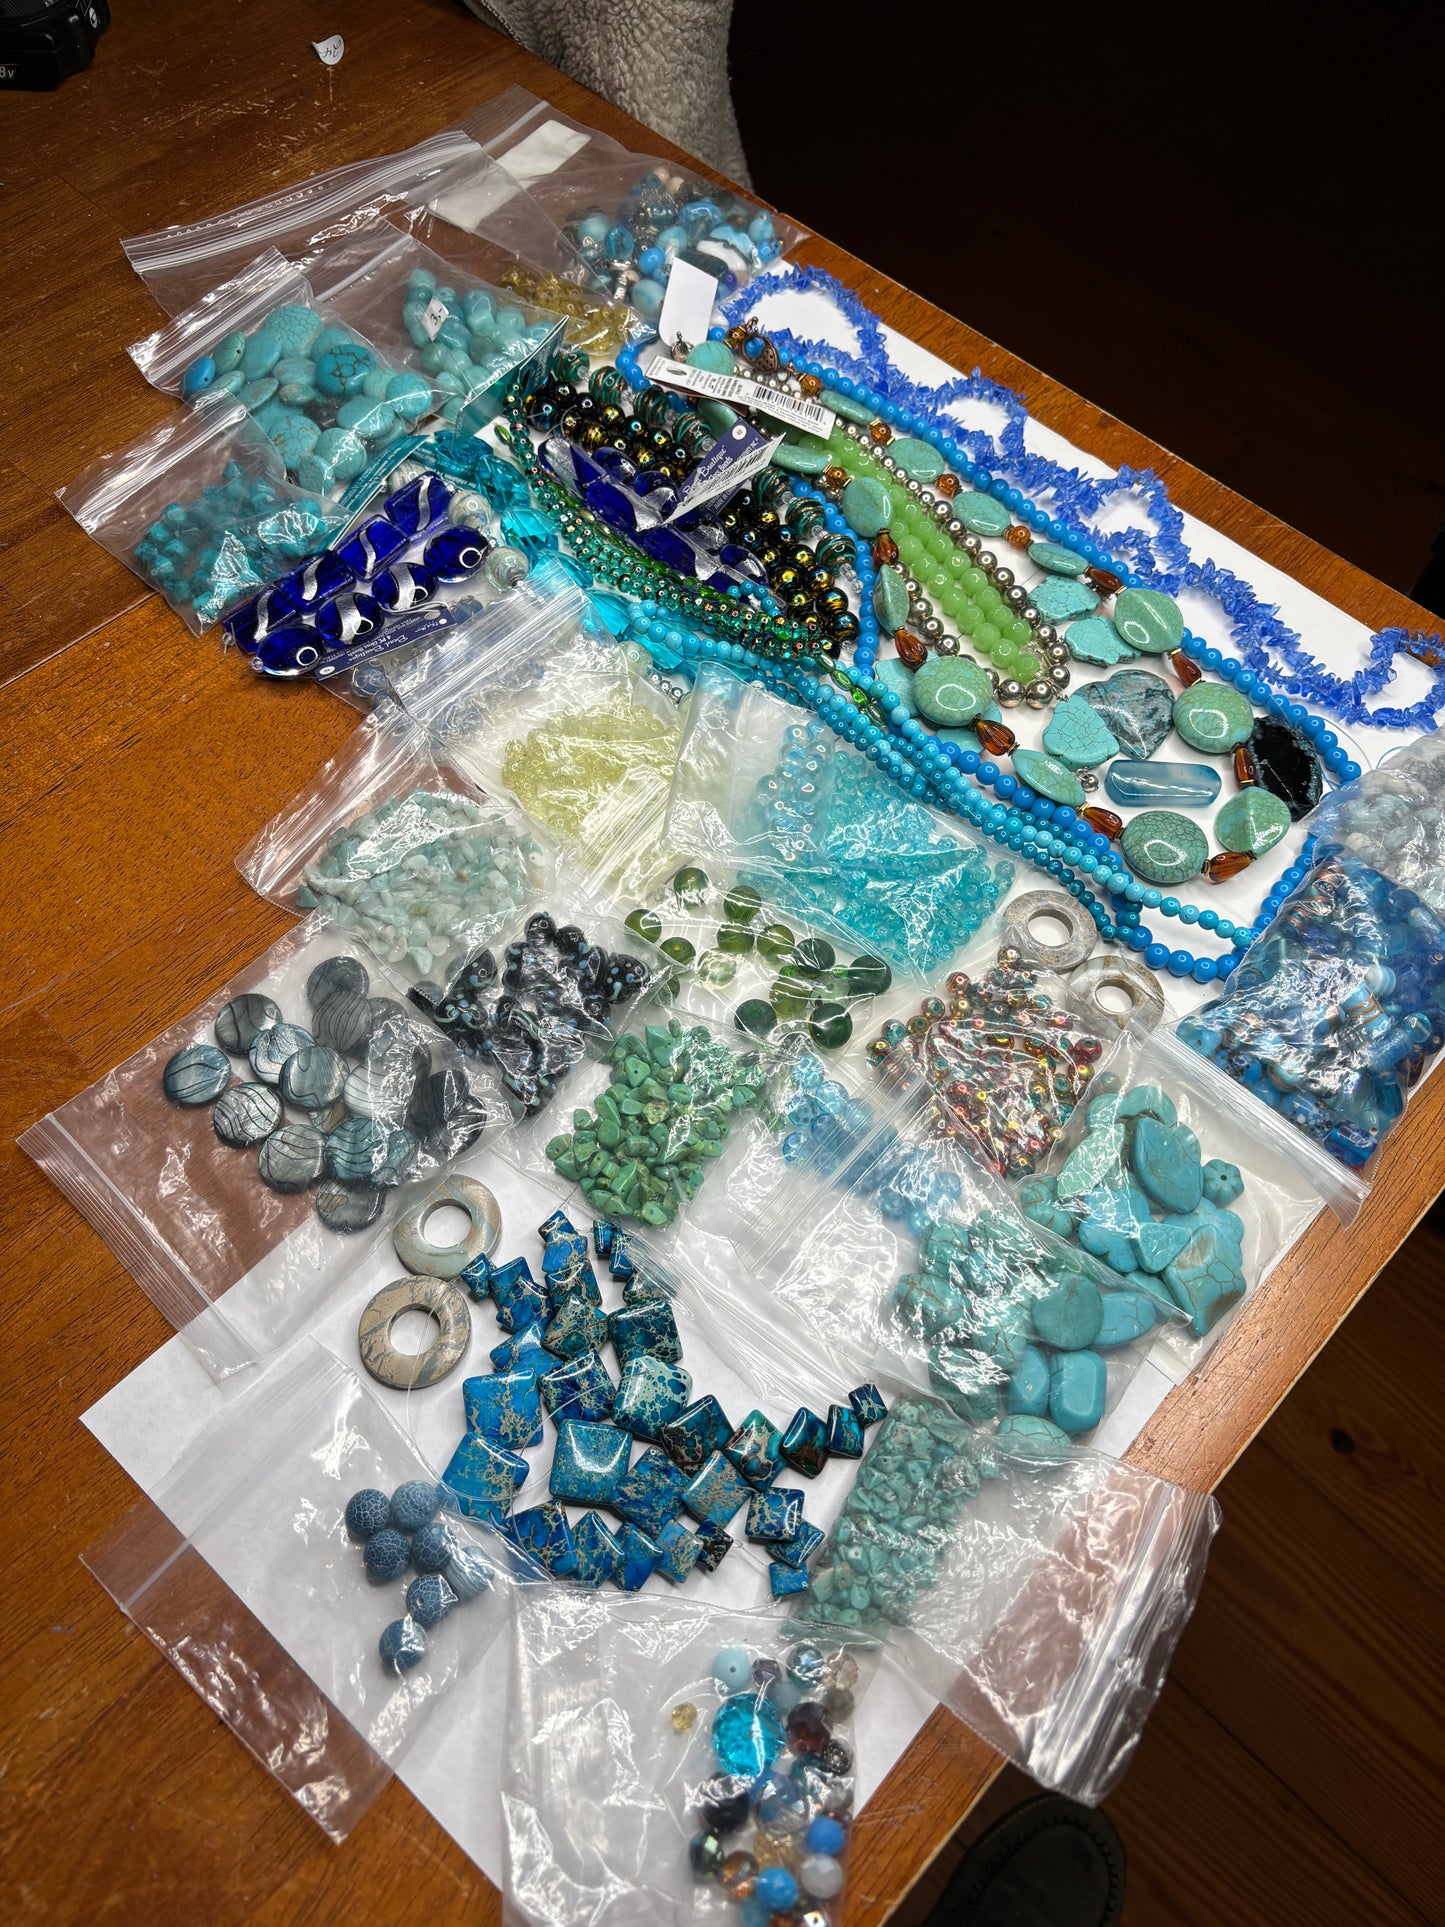 HUGE LOT 4.6 Pounds, Blue and Green Mix Glass and Natural Stone Beads, Grab Bag